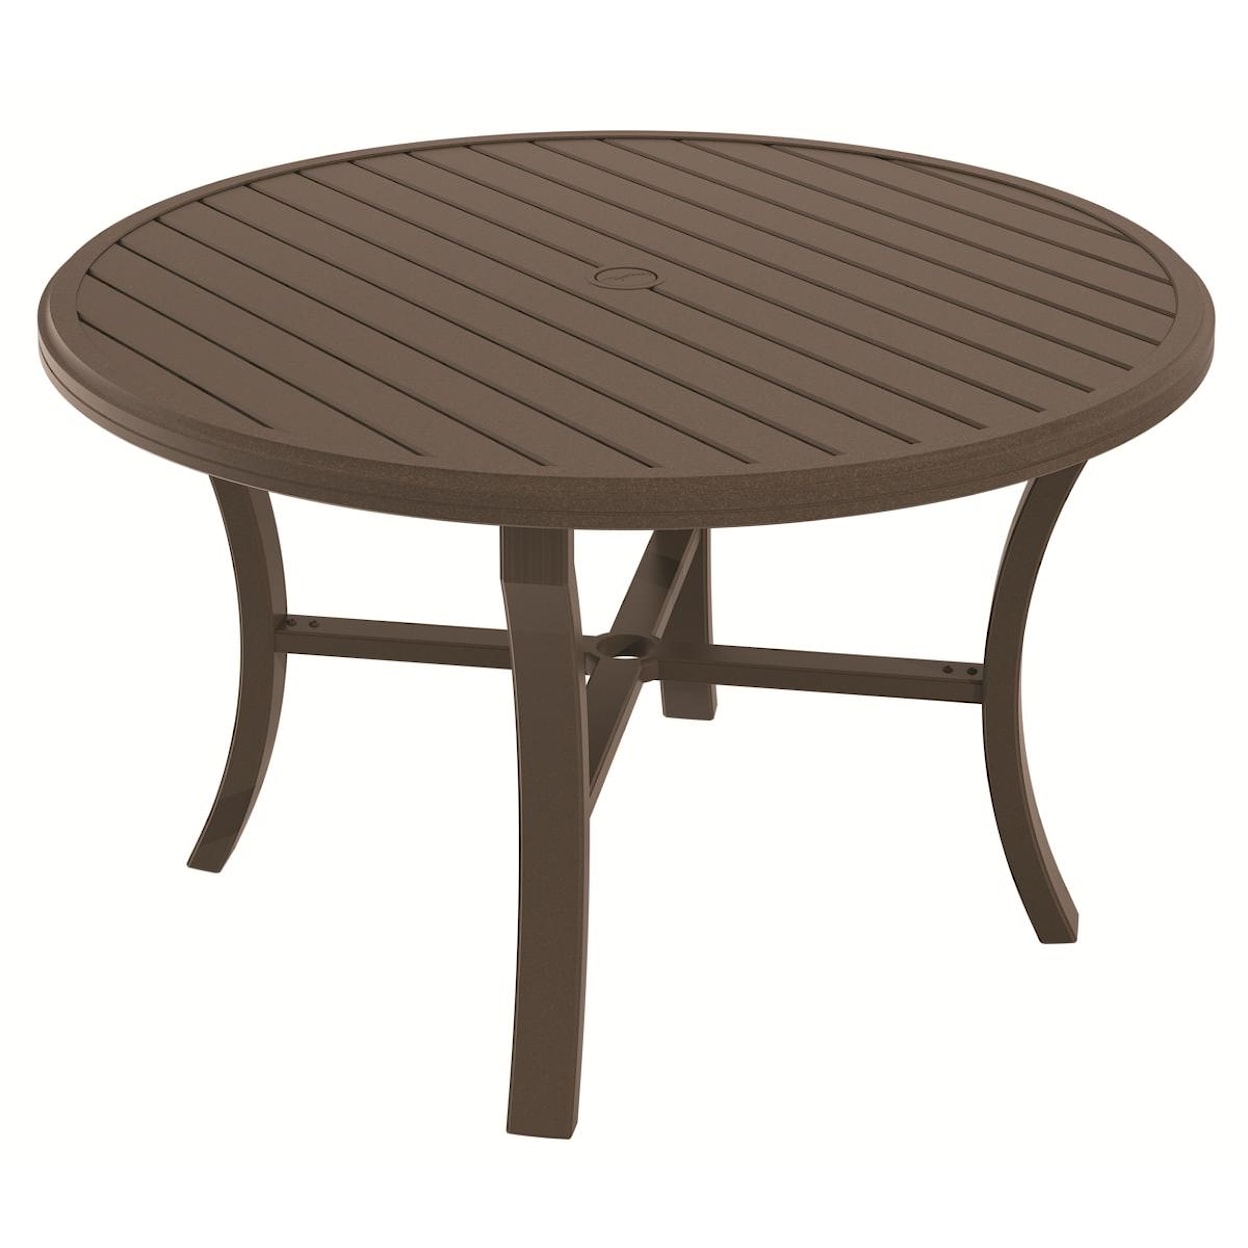 Tropitone Outdoor Tables Round Dining Table